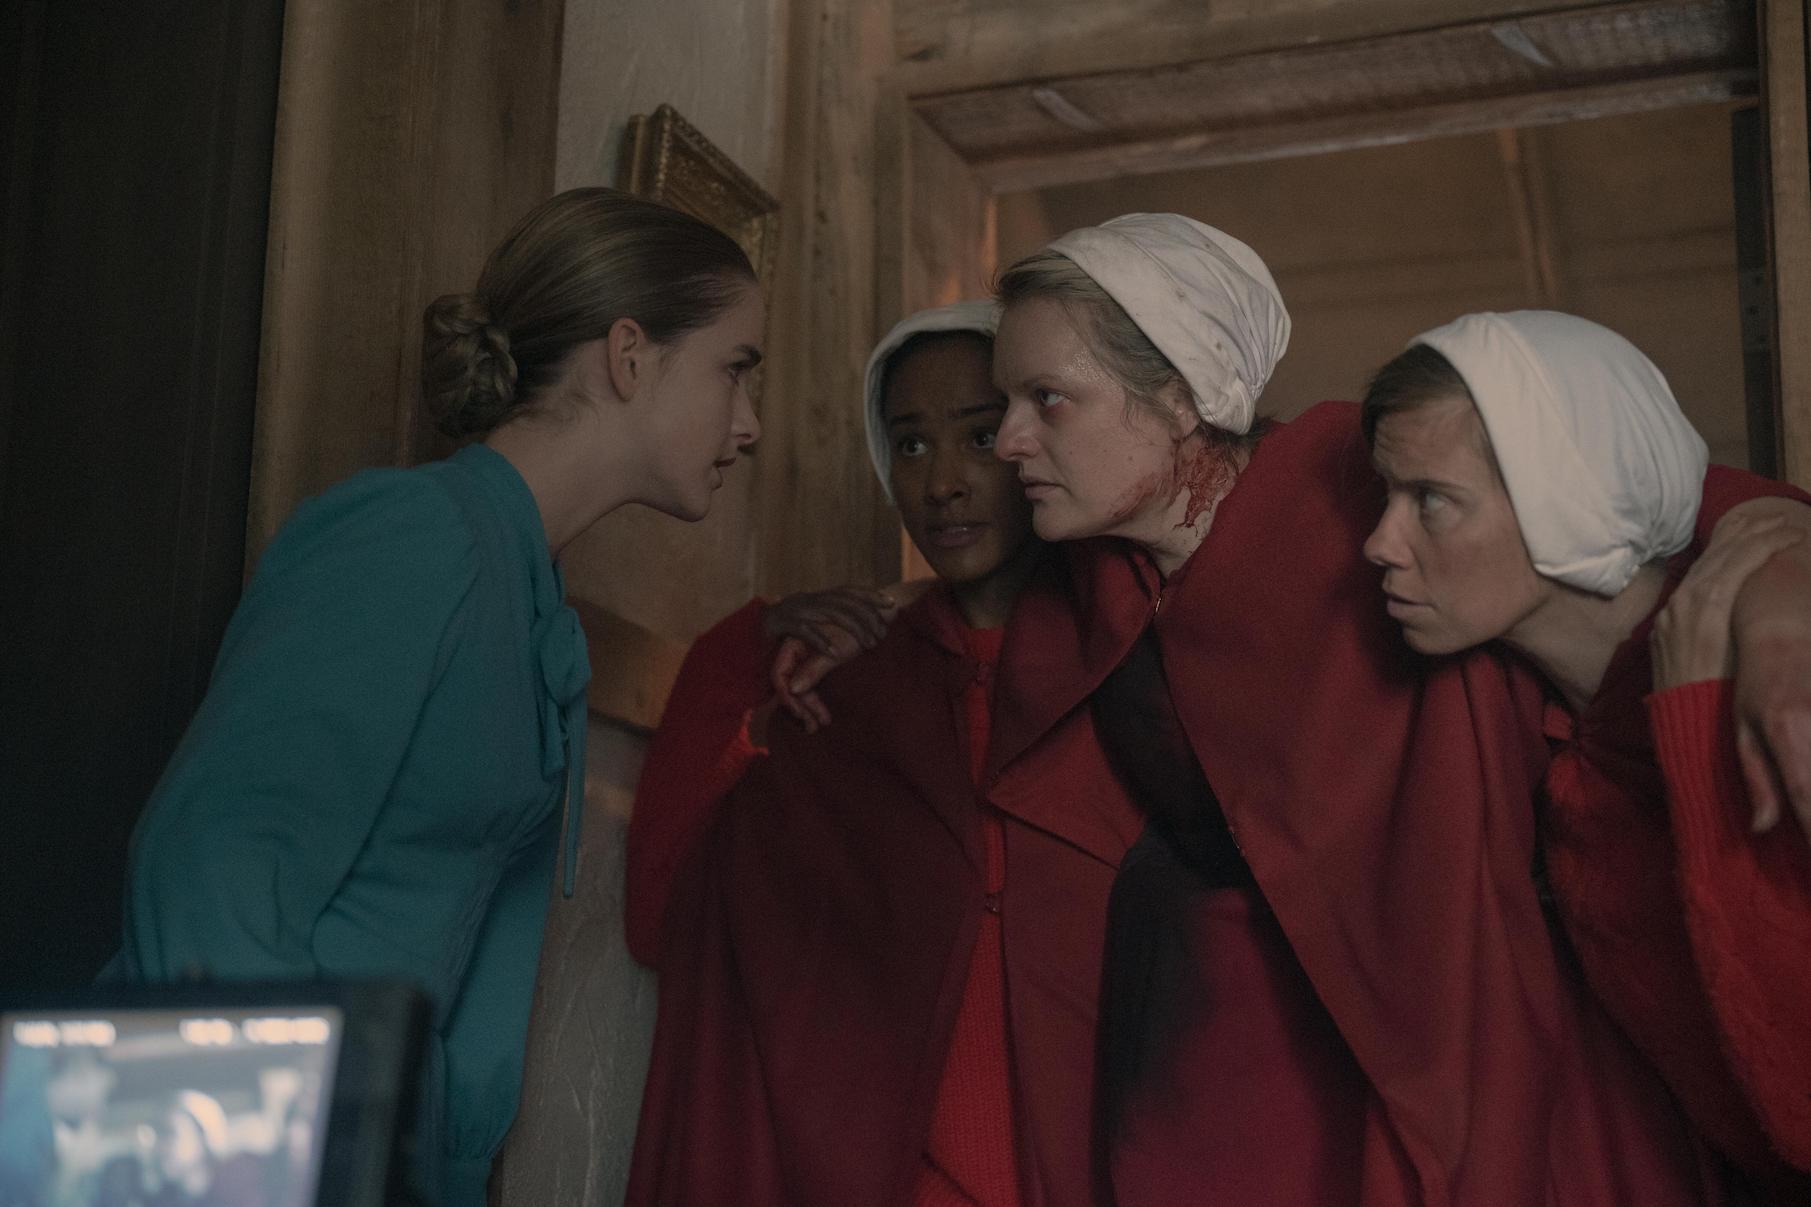 Three of the handmaids talking to Esther in 'The Handmaid's Tale' Season 4